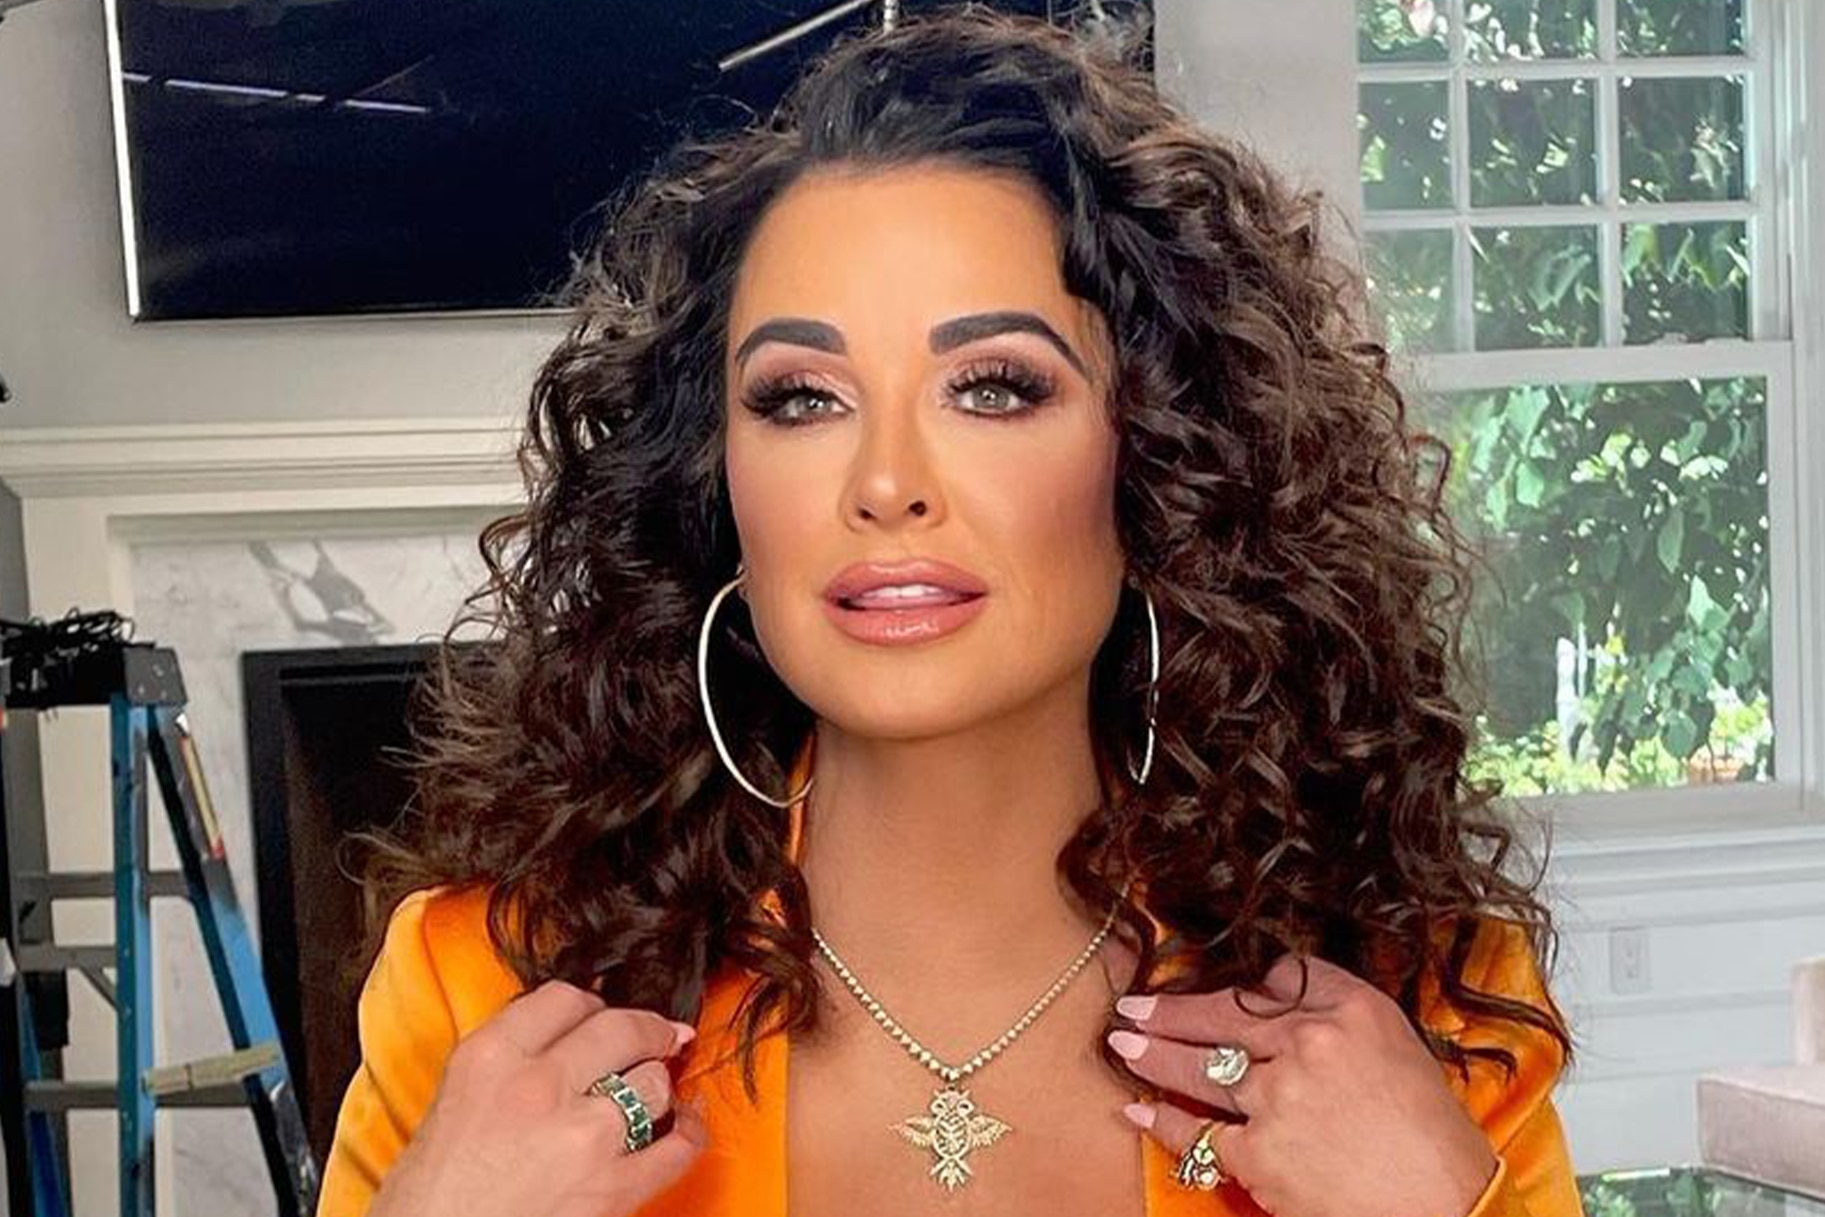 Kyle Richards on Rebuilding Her Birkin Collection: “I Try to Get